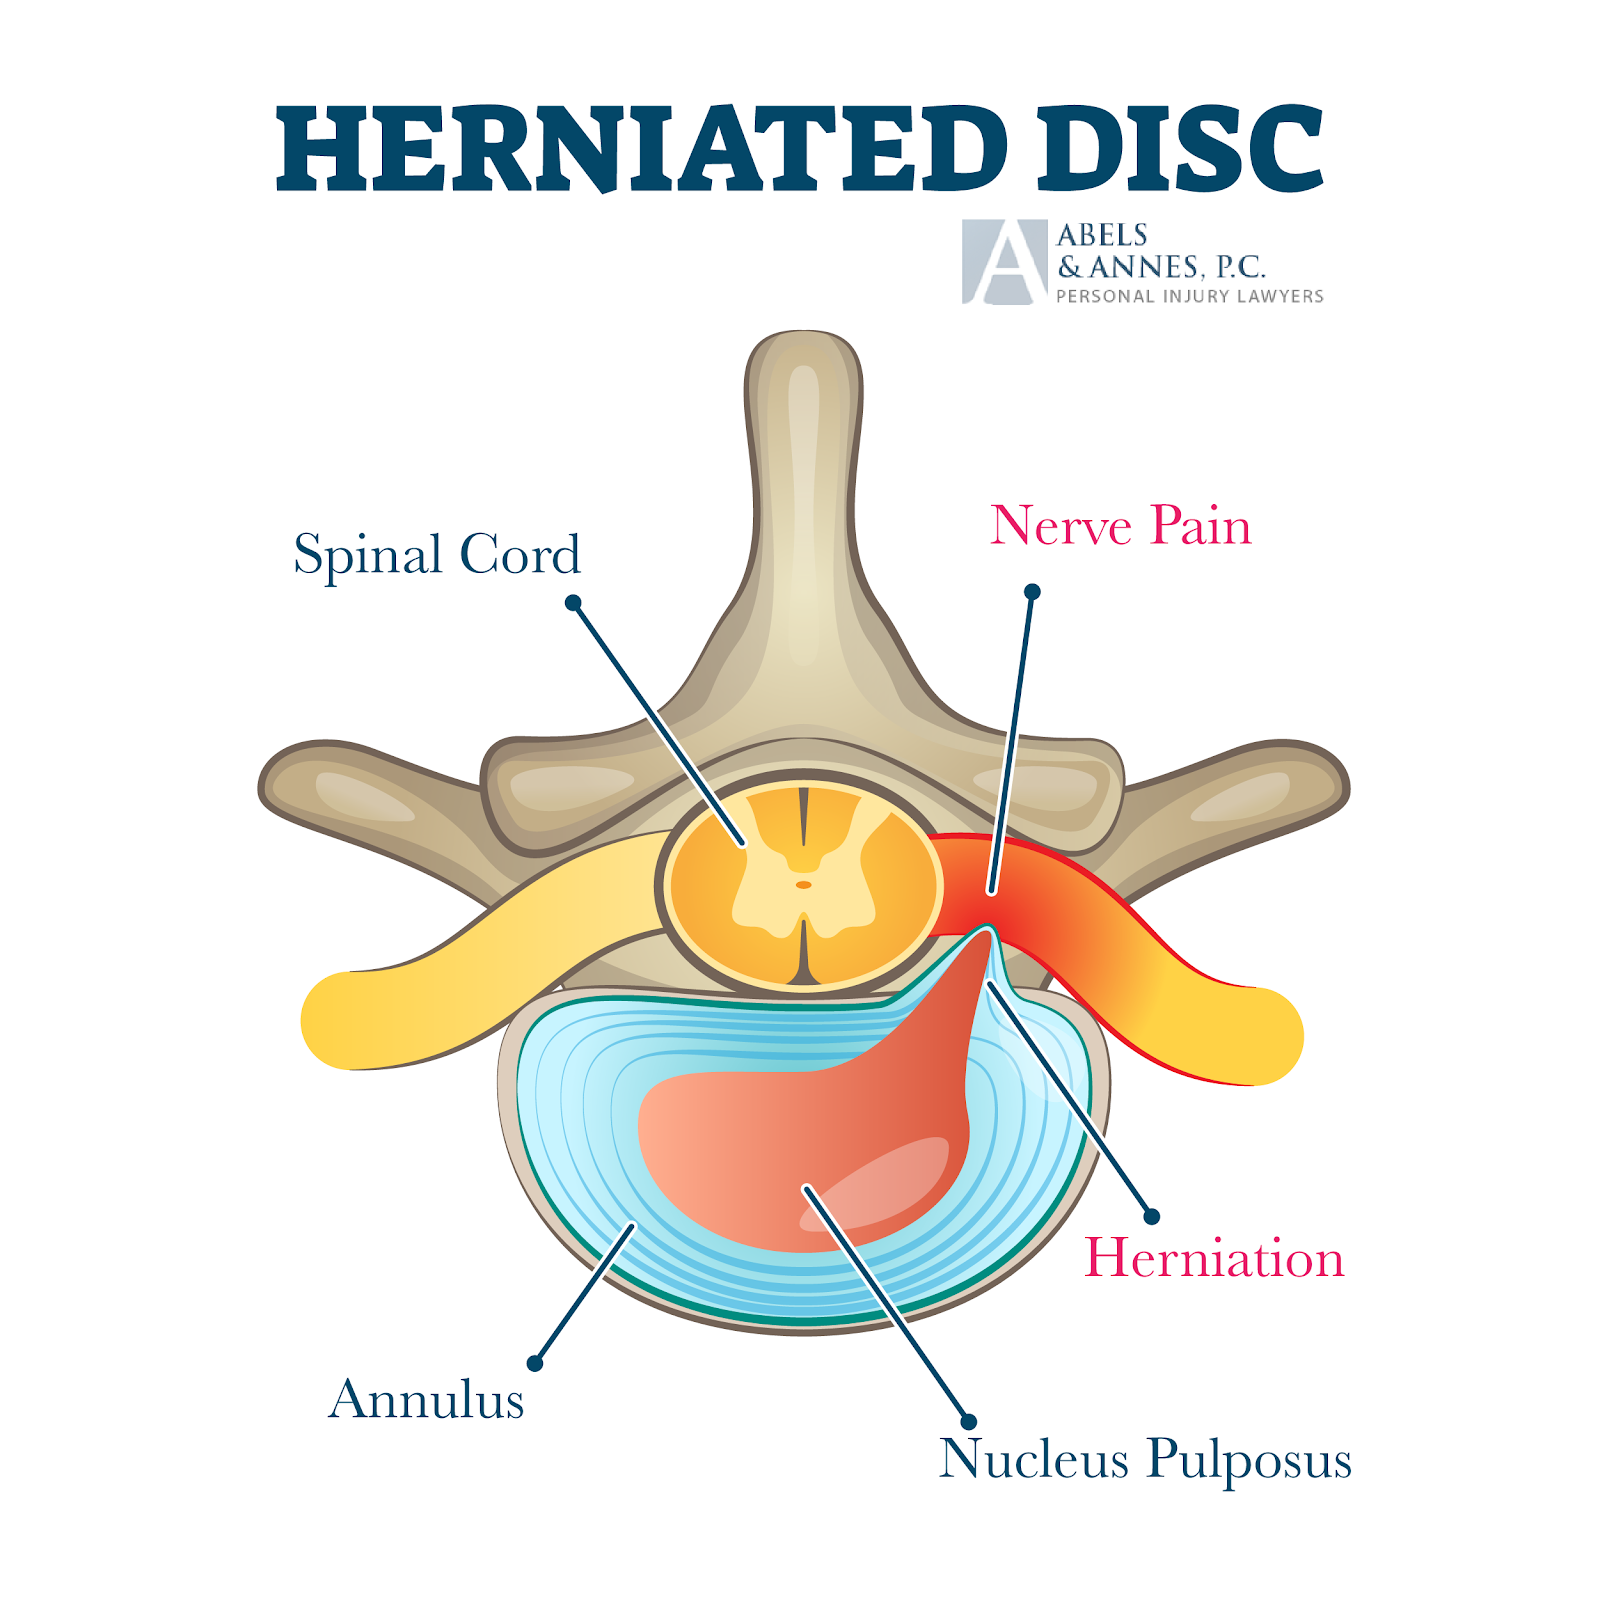 Herniated Disc - Abels and Annes Chicago Personal Injury Attorneys